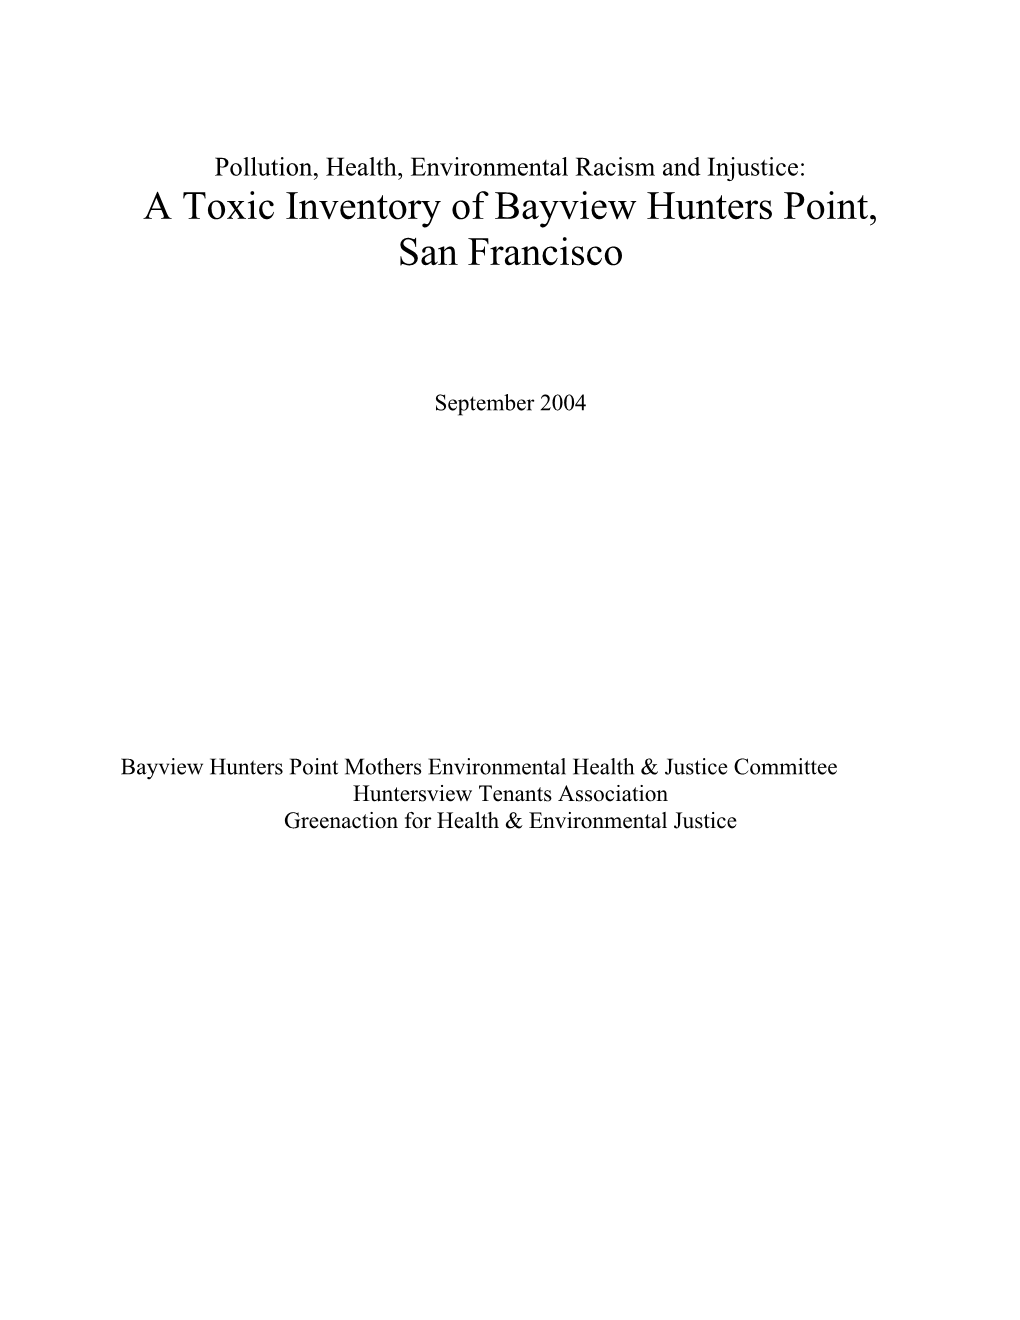 A Toxic Inventory of Bayview Hunters Point, San Francisco